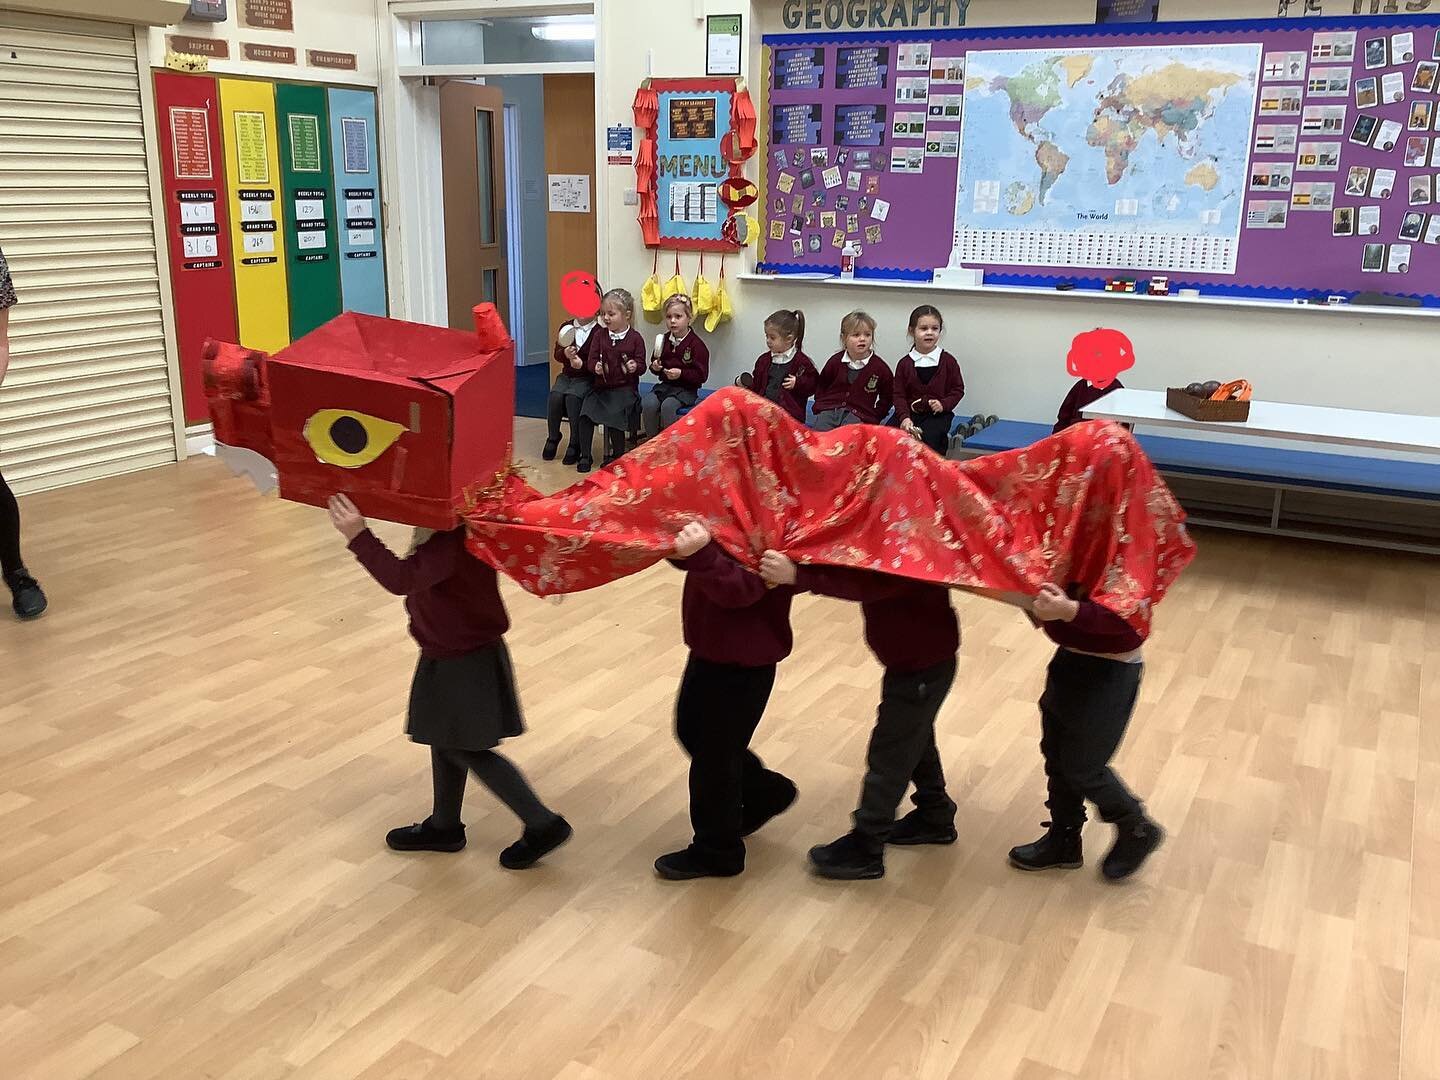 Skipsea EYFS have had great fun celebrating Chinese New Year. We have had a go using chop sticks, learnt Chinese writing, read The Great Race and know it&rsquo;s the year of the tiger. The children then made their own Chinese dragon and performed the